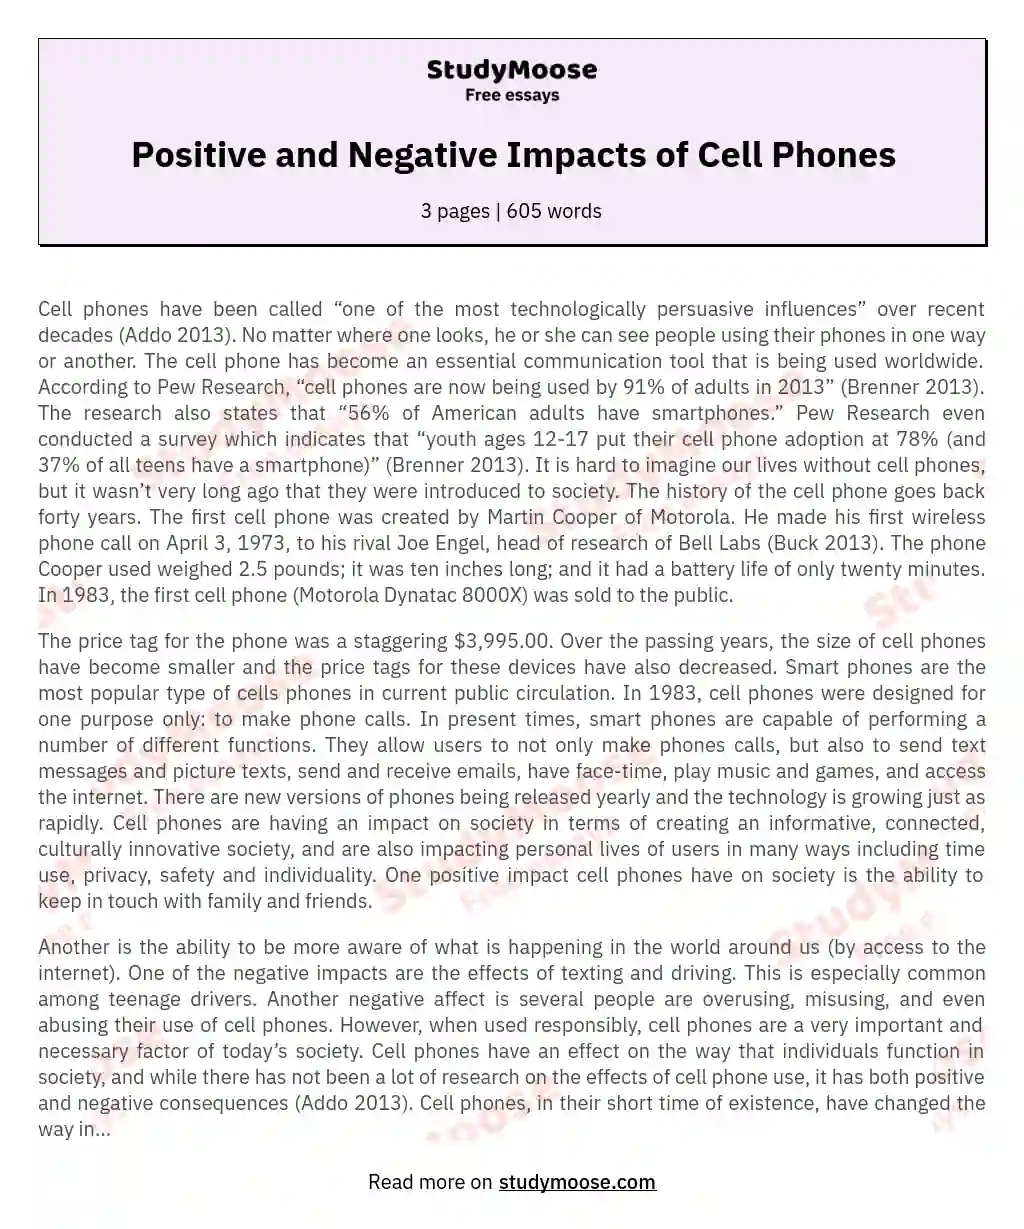 Positive and Negative Impacts of Cell Phones essay